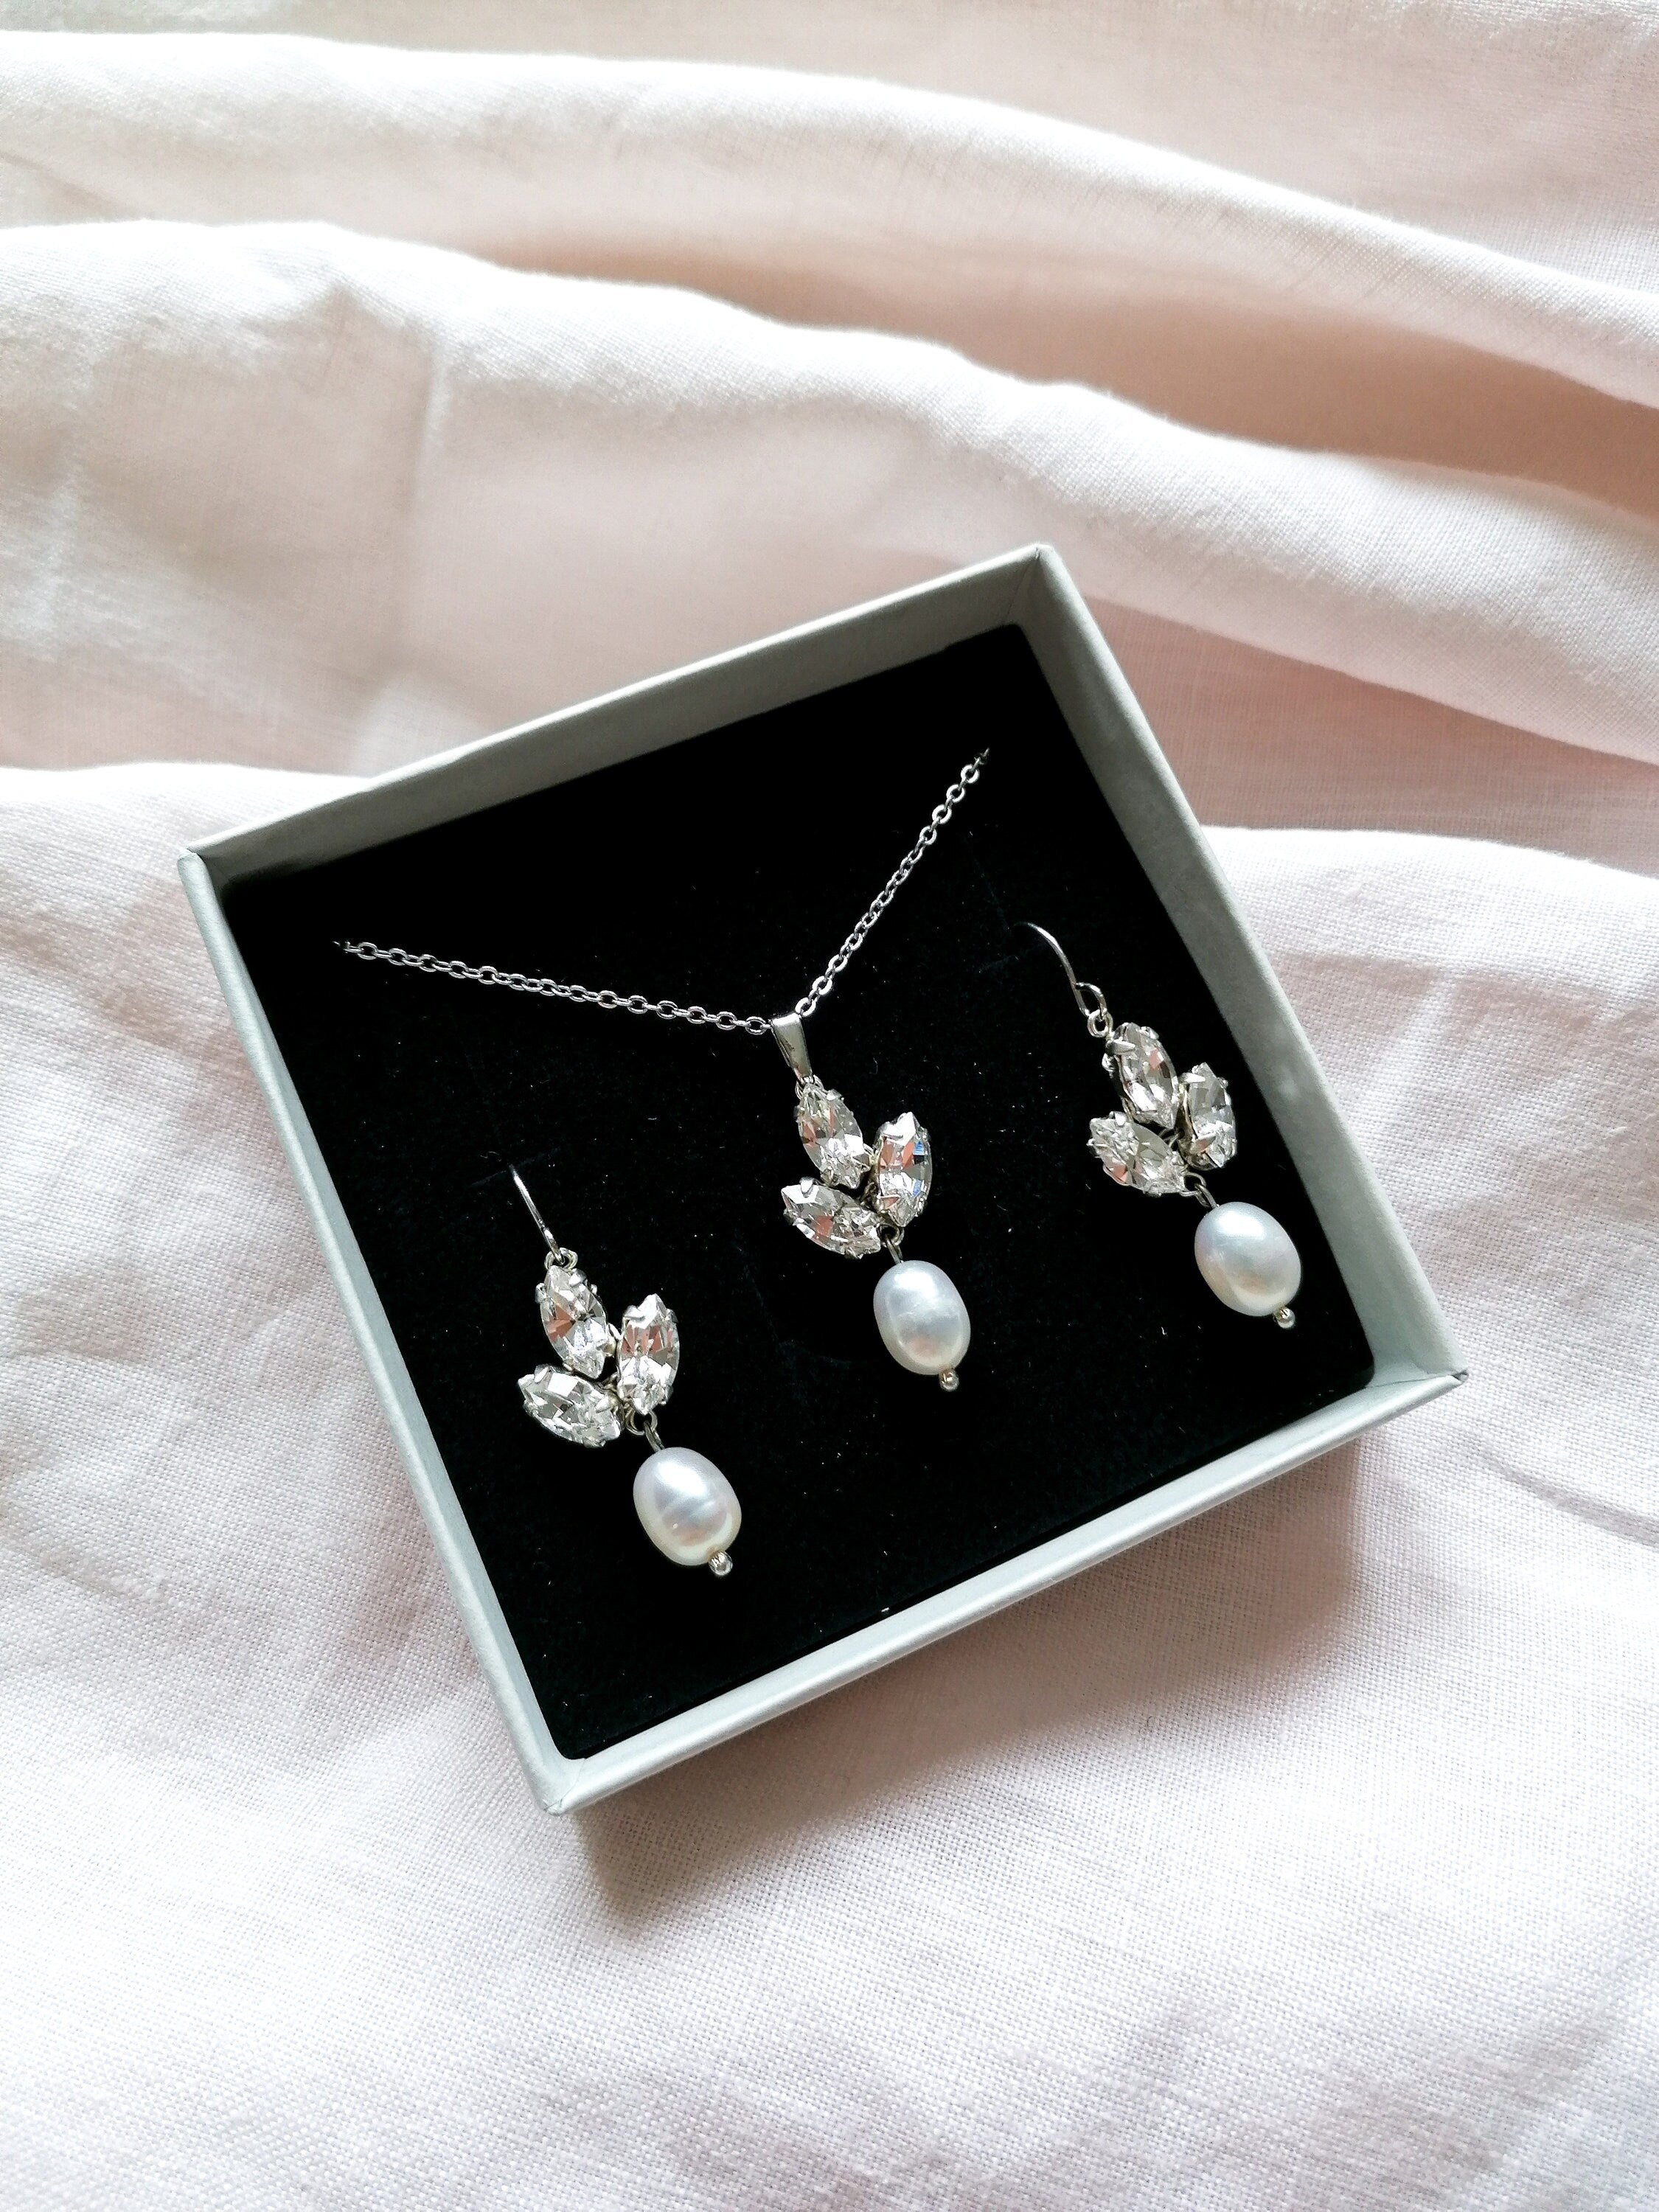 Luxury Crystal Bridal Jewelry Set Diamante Necklace And Earrings, And Charm  Accessories For Women Wholesale And Retail From Yujiliu, $13.76 | DHgate.Com